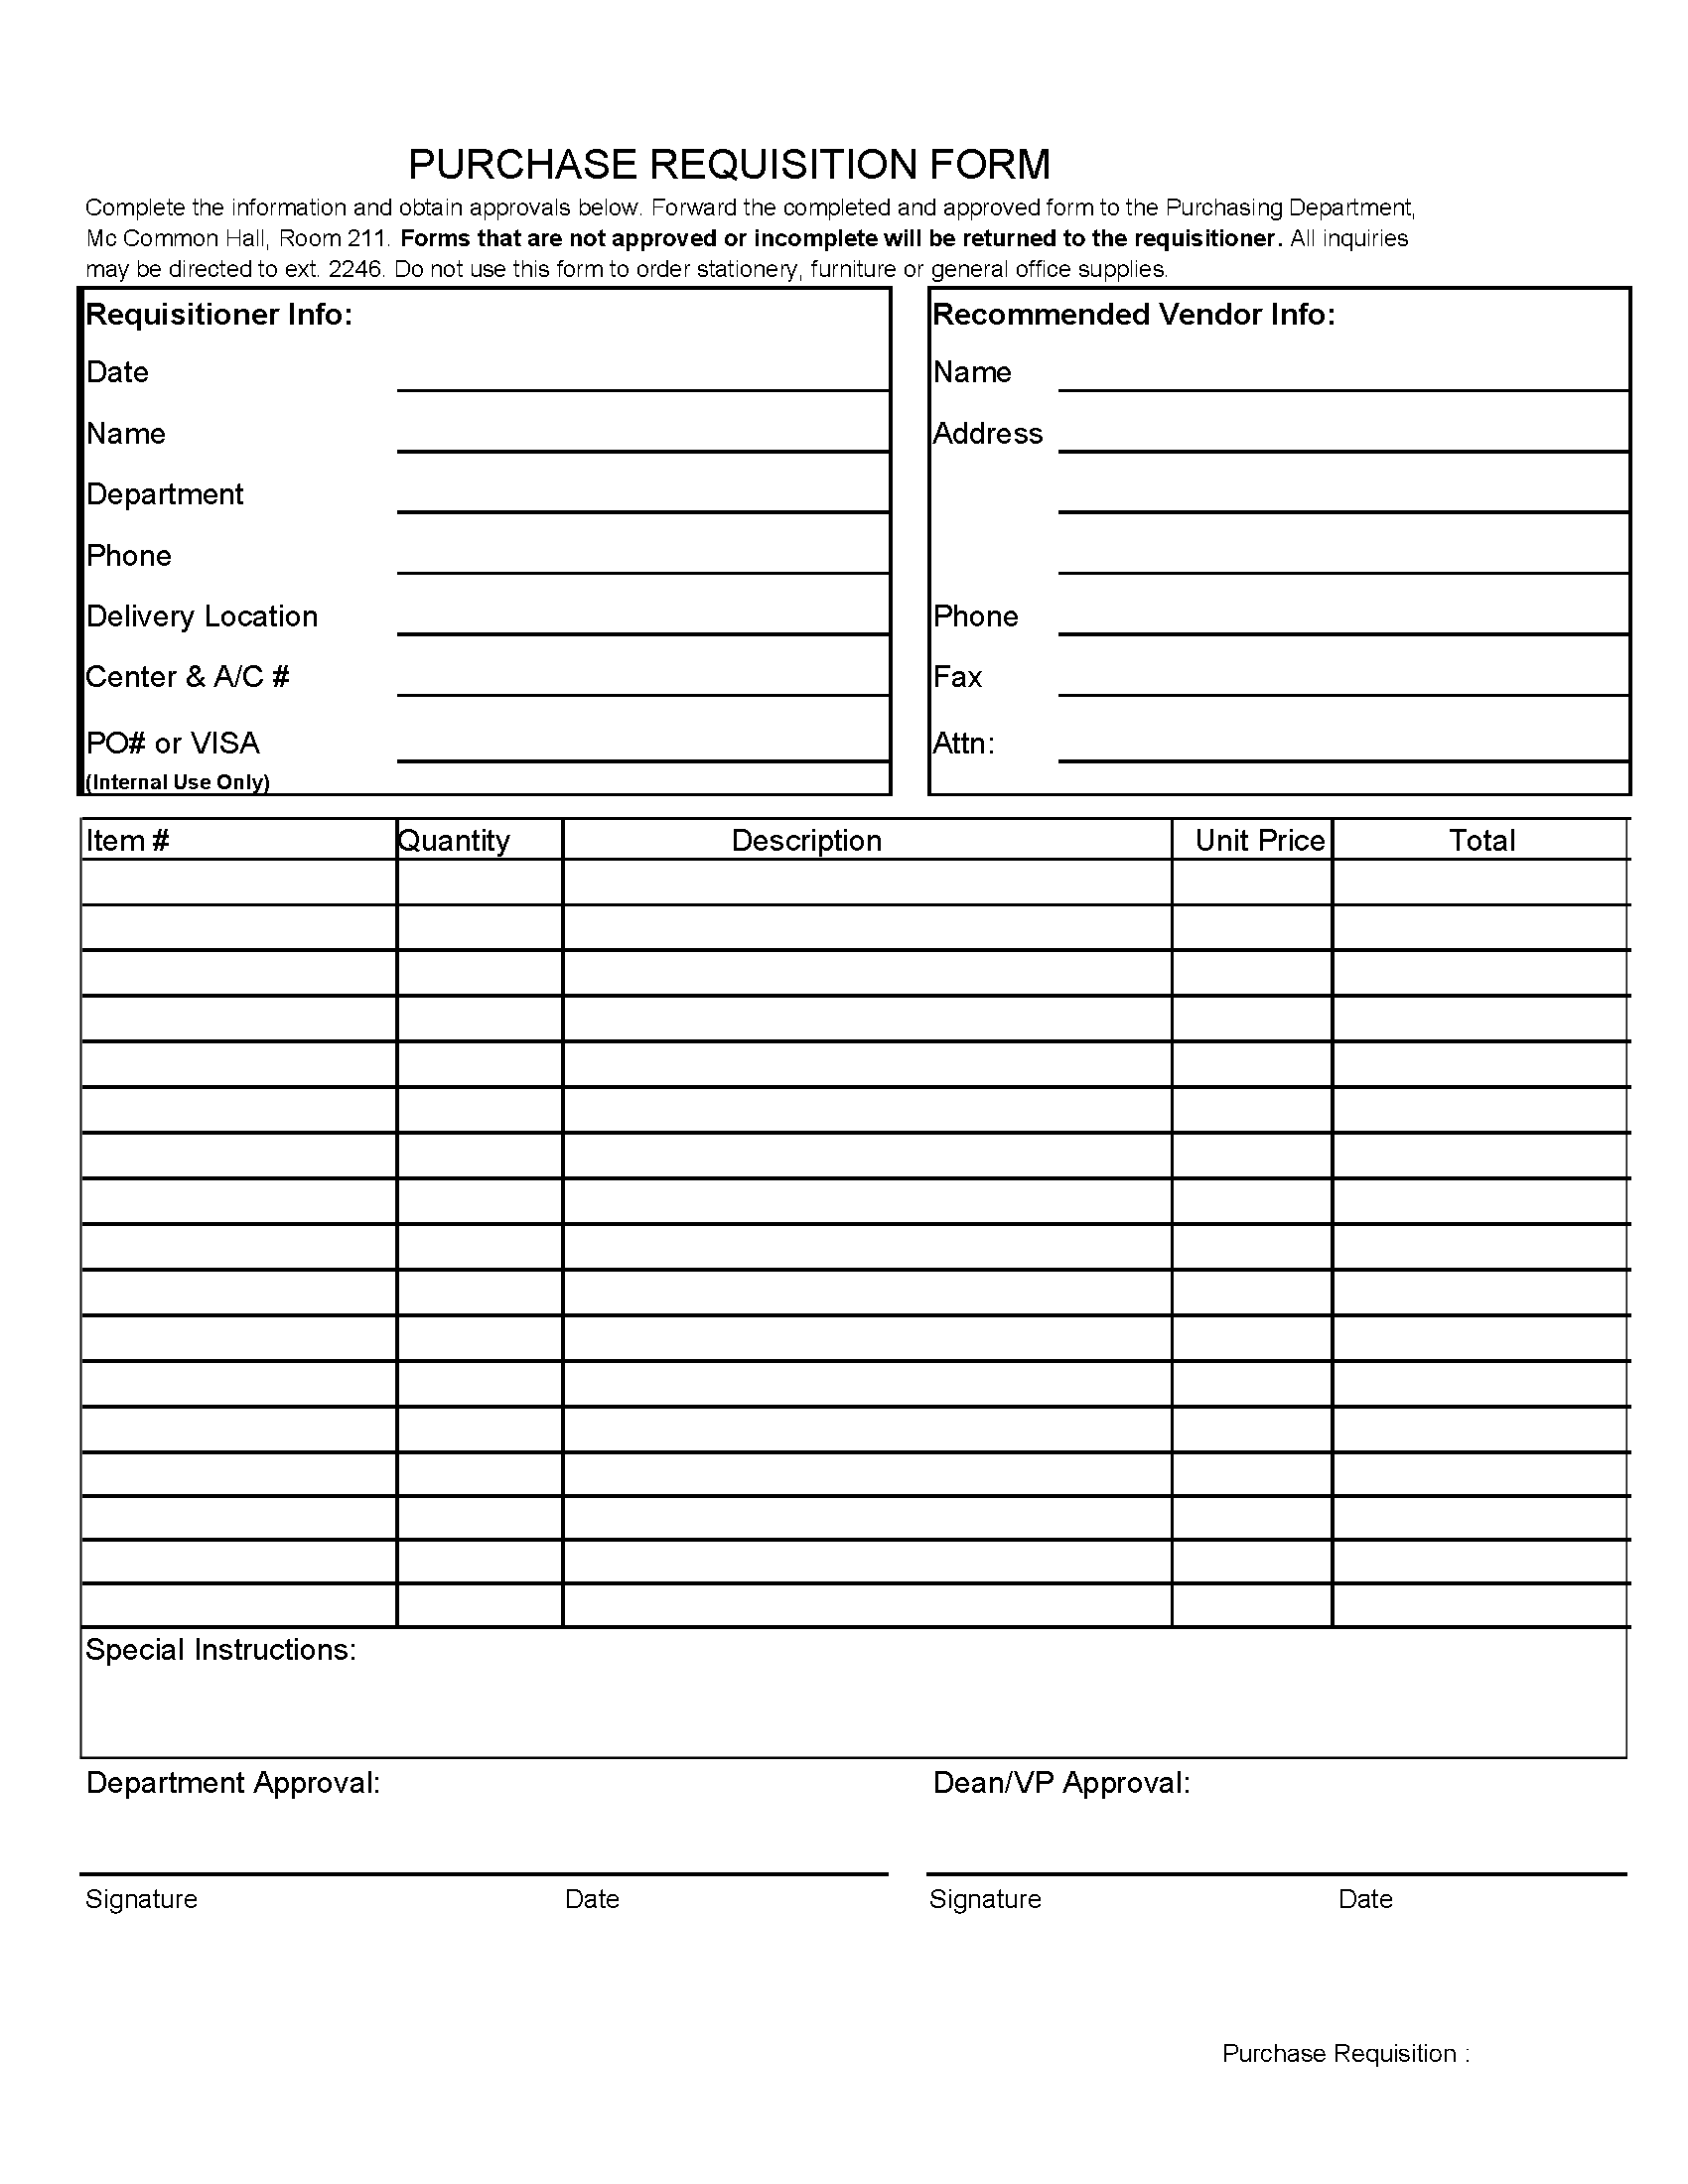 14 - Purchase Requisition Form